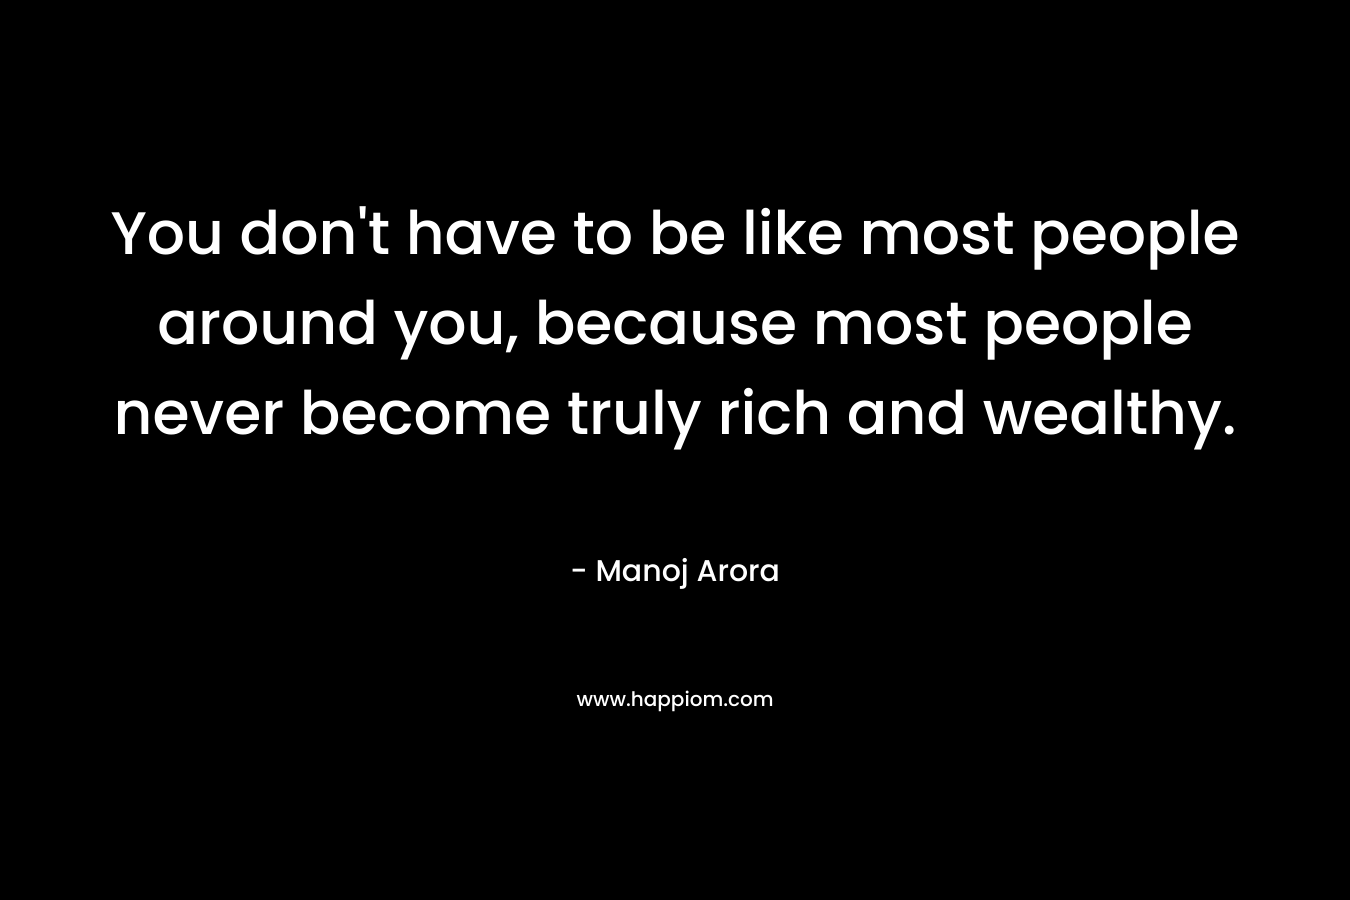 You don't have to be like most people around you, because most people never become truly rich and wealthy.